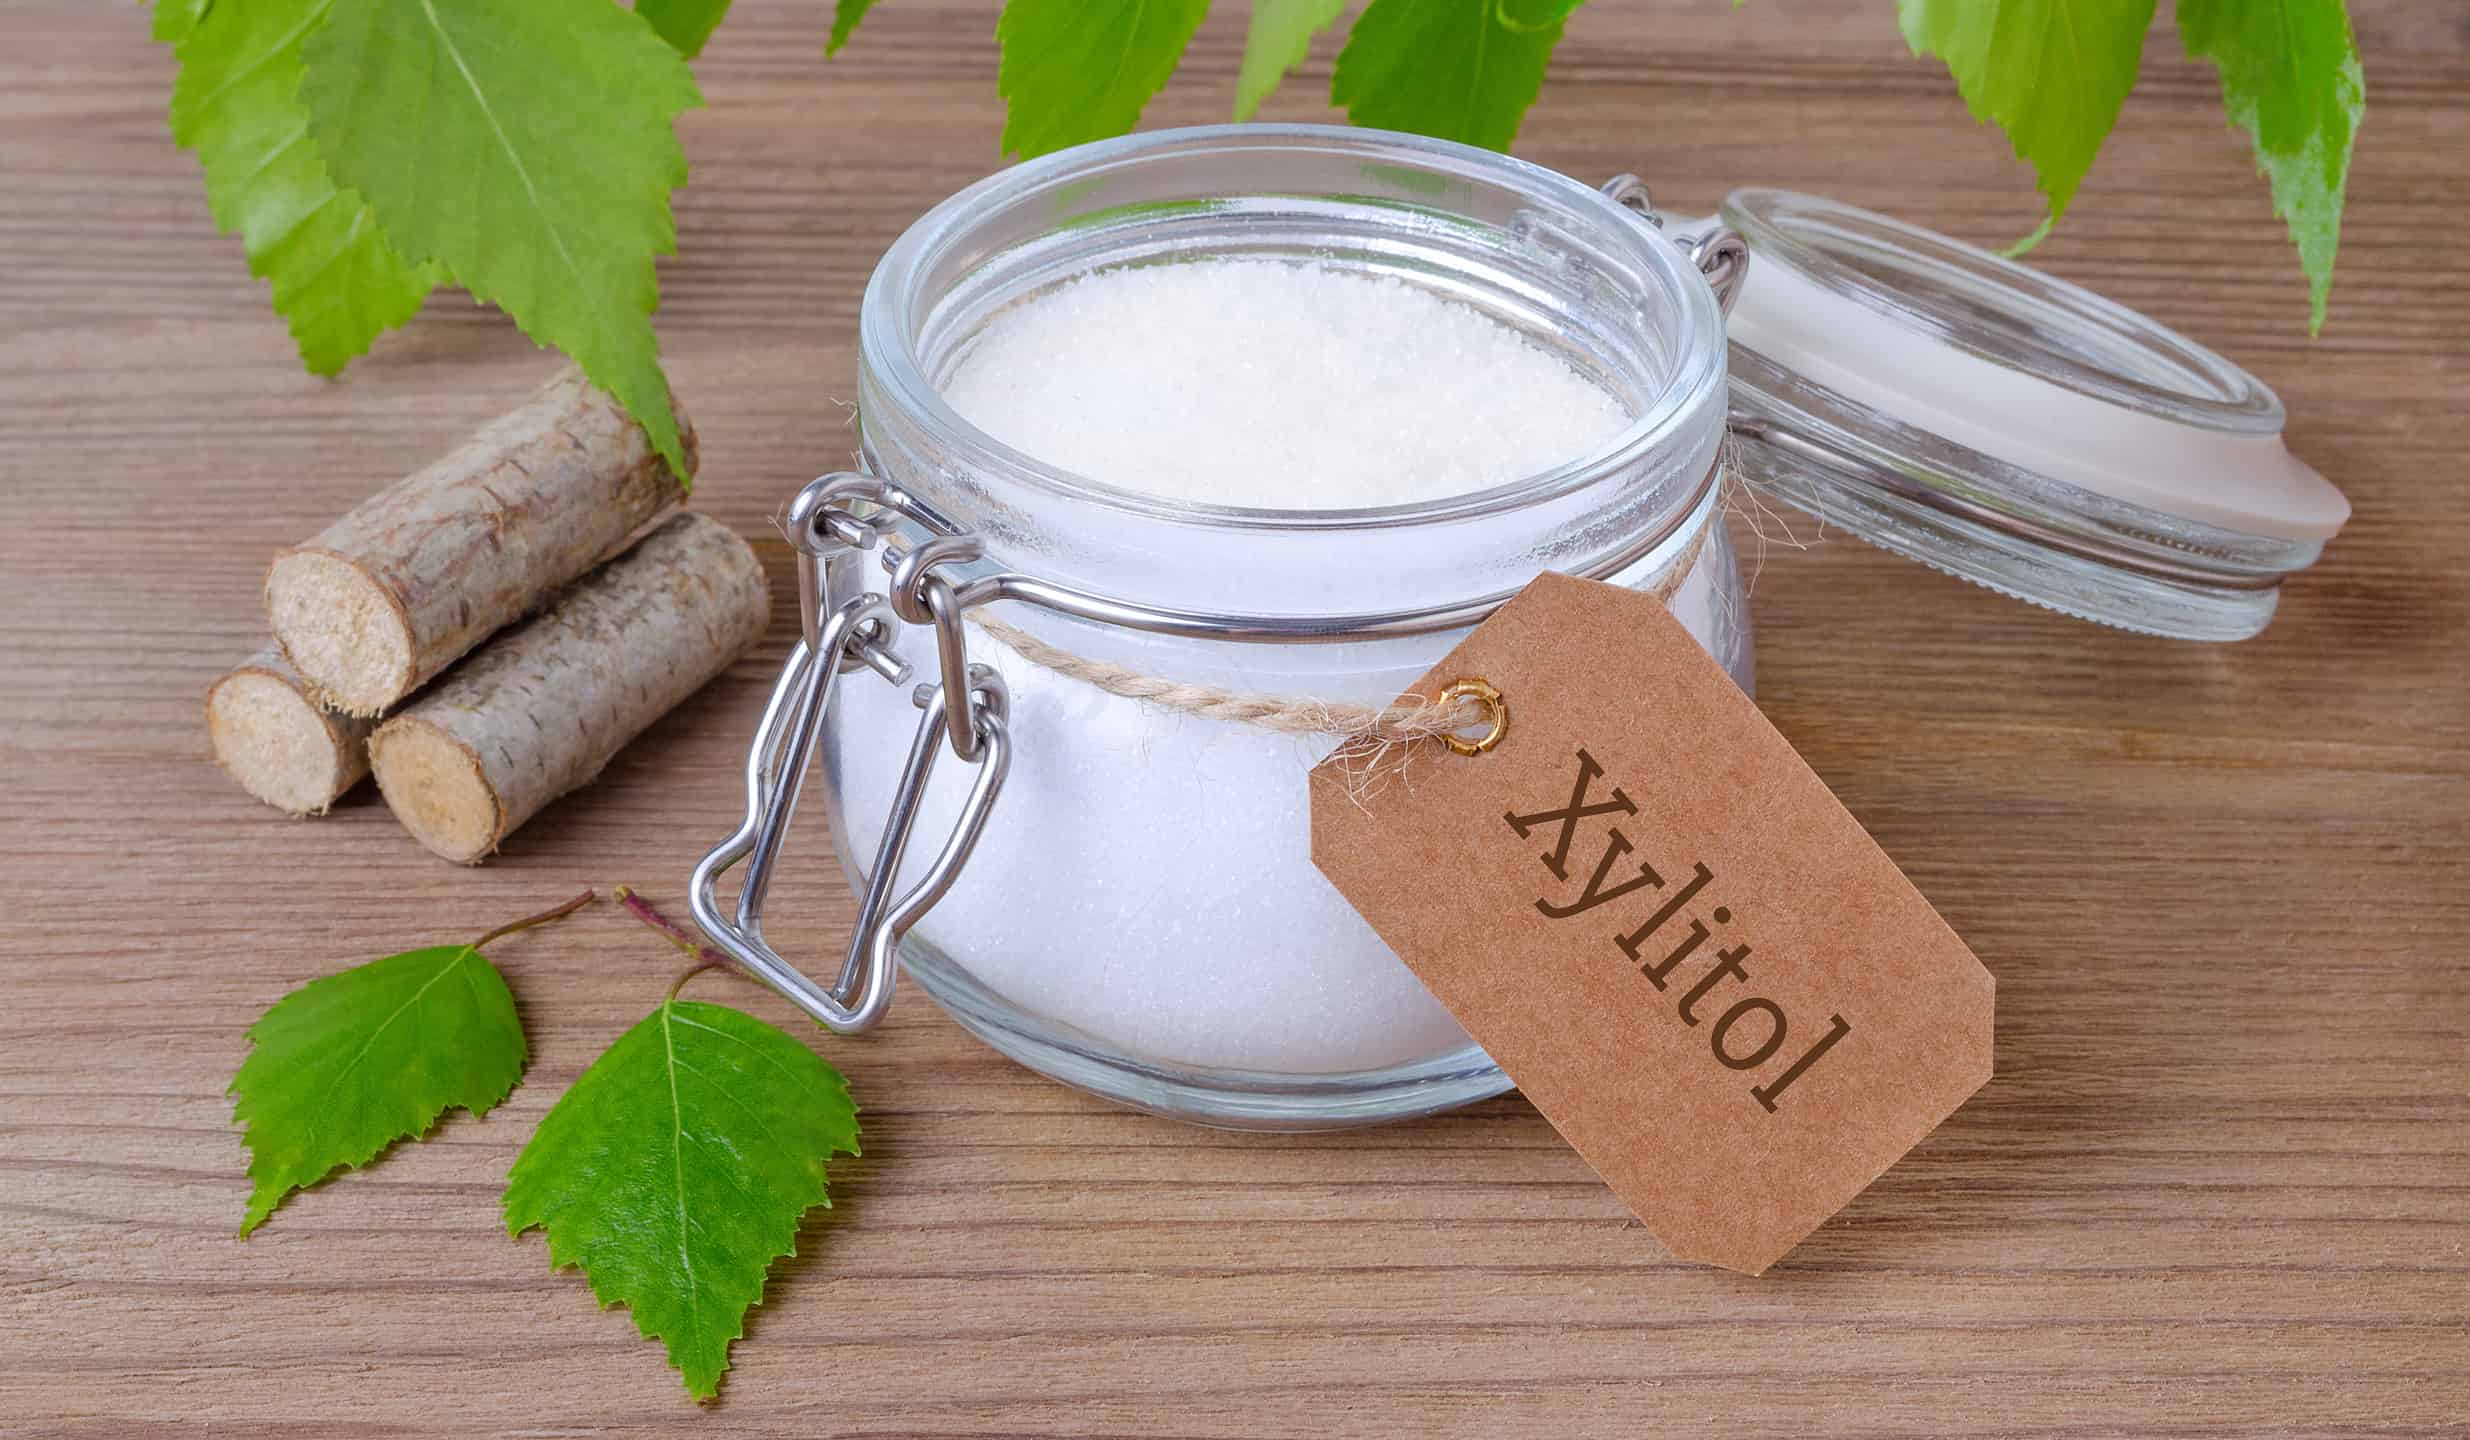 sugar substitute xylitol, a glass jar with birch sugar, liefs and wood on wooden background